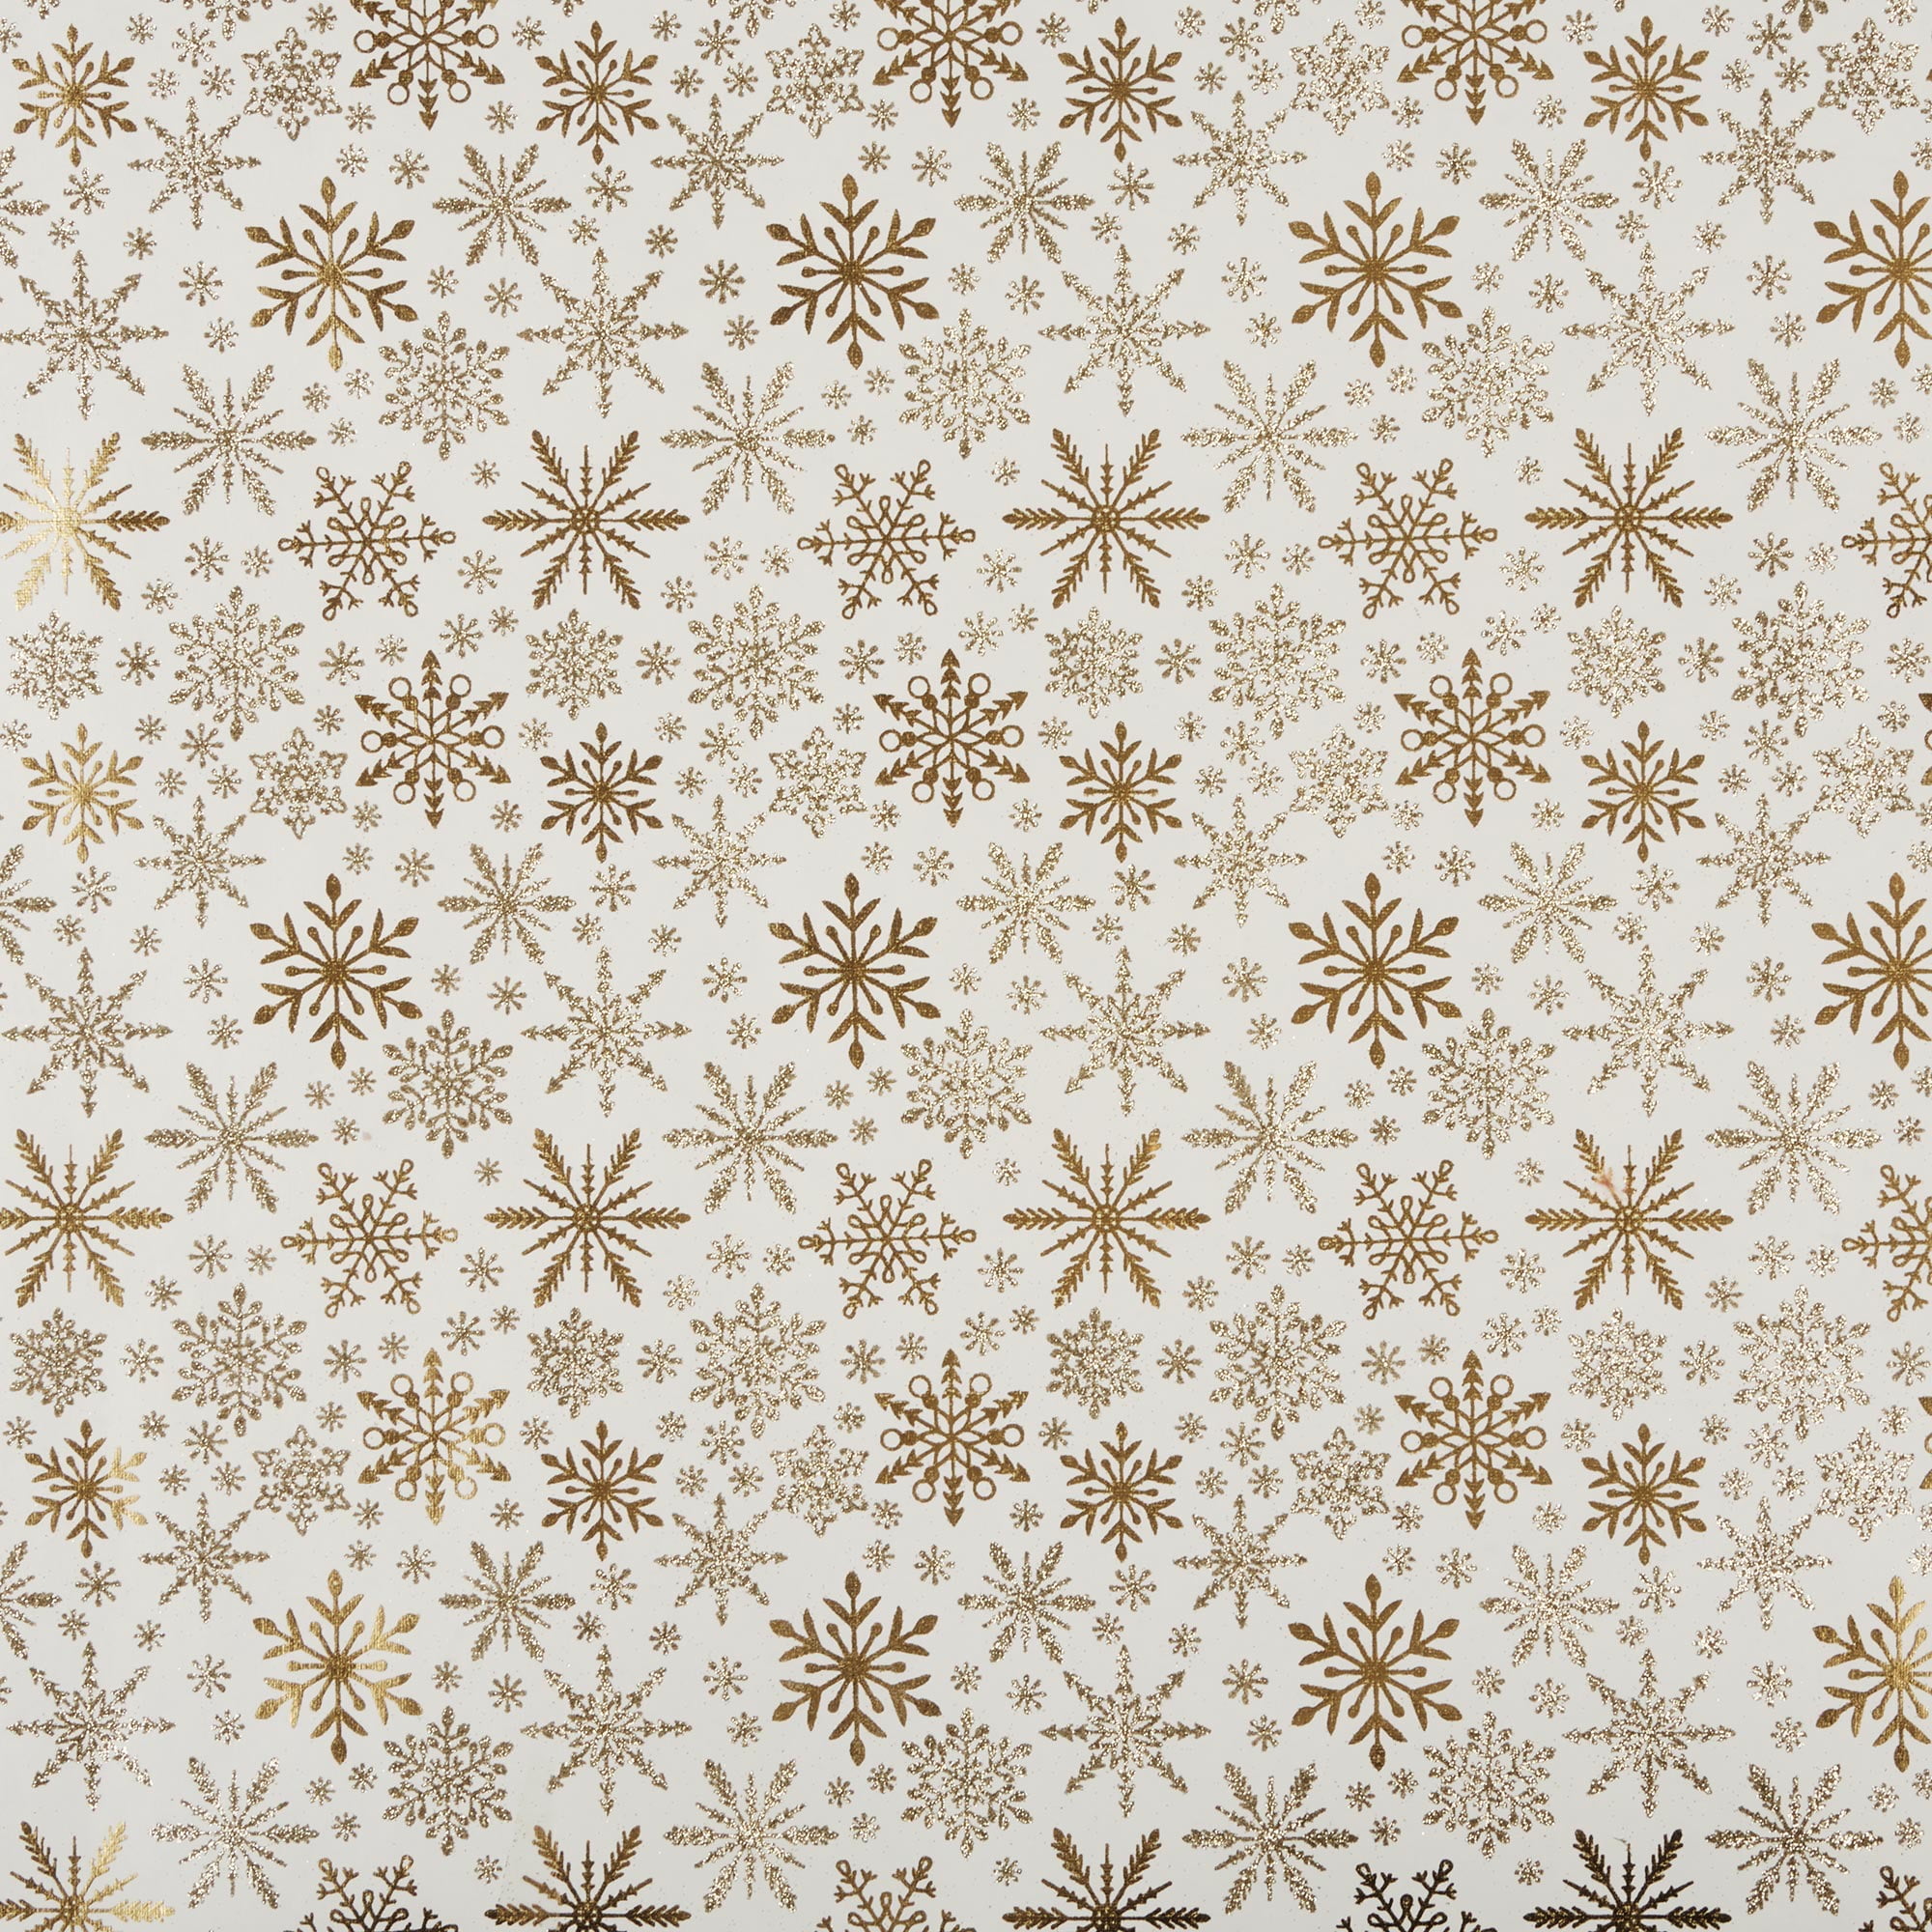 MIAHART 60 Gold Christmas Snowflake Tissue Paper Sheets 50x35cm Christmas  Wrapping Paper for DIY and Craft Gift Bags Decorations(Gold)